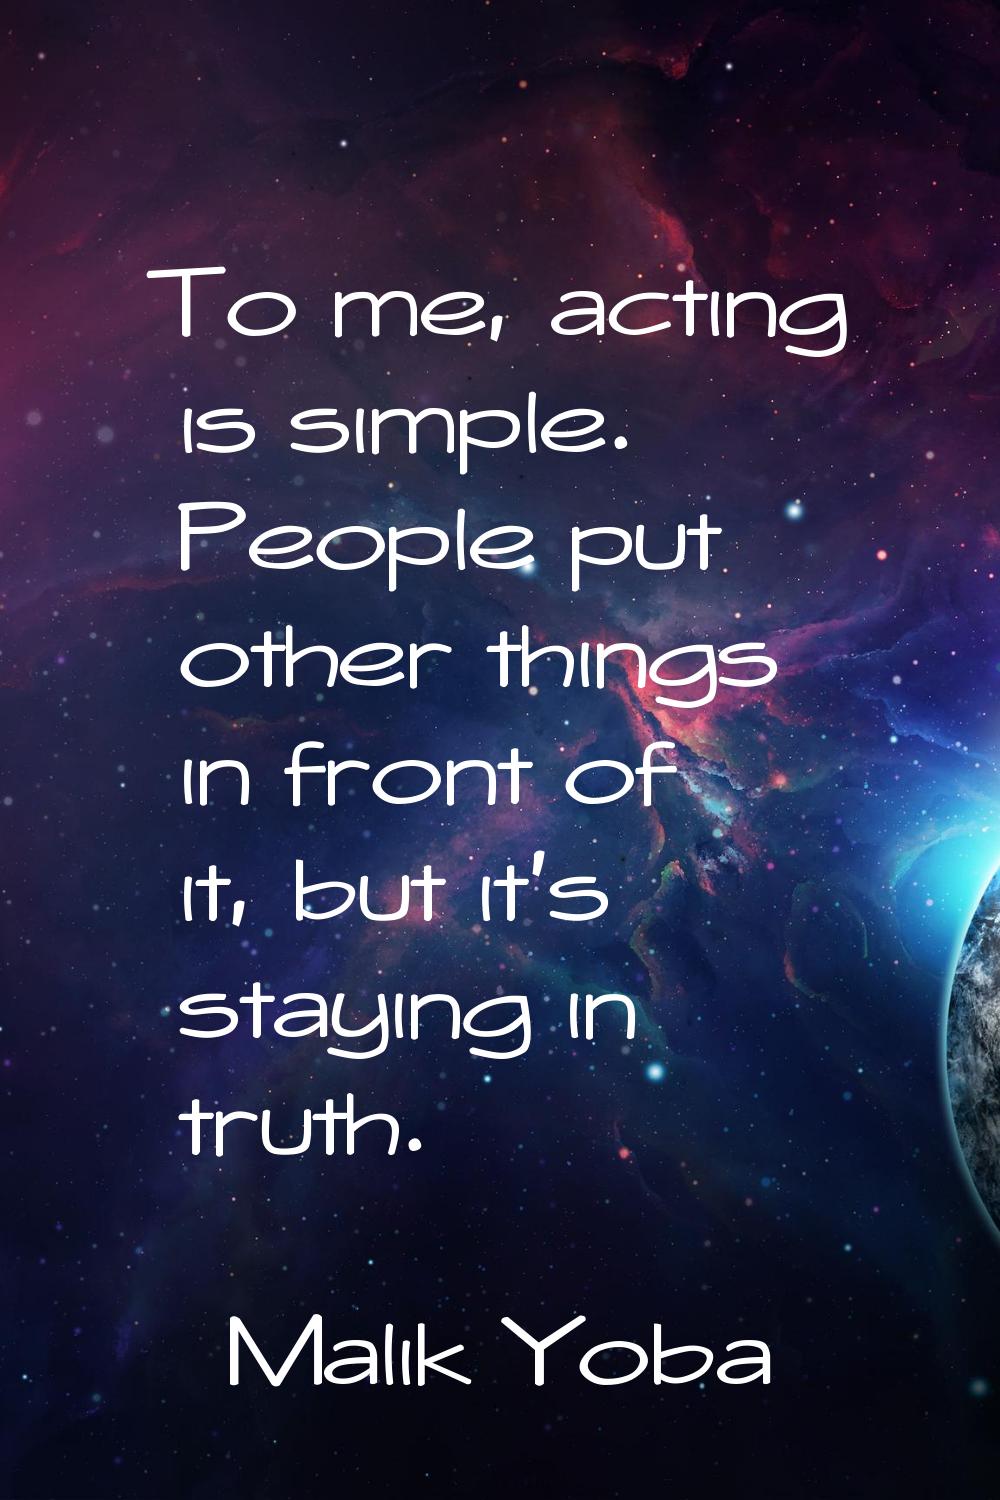 To me, acting is simple. People put other things in front of it, but it's staying in truth.